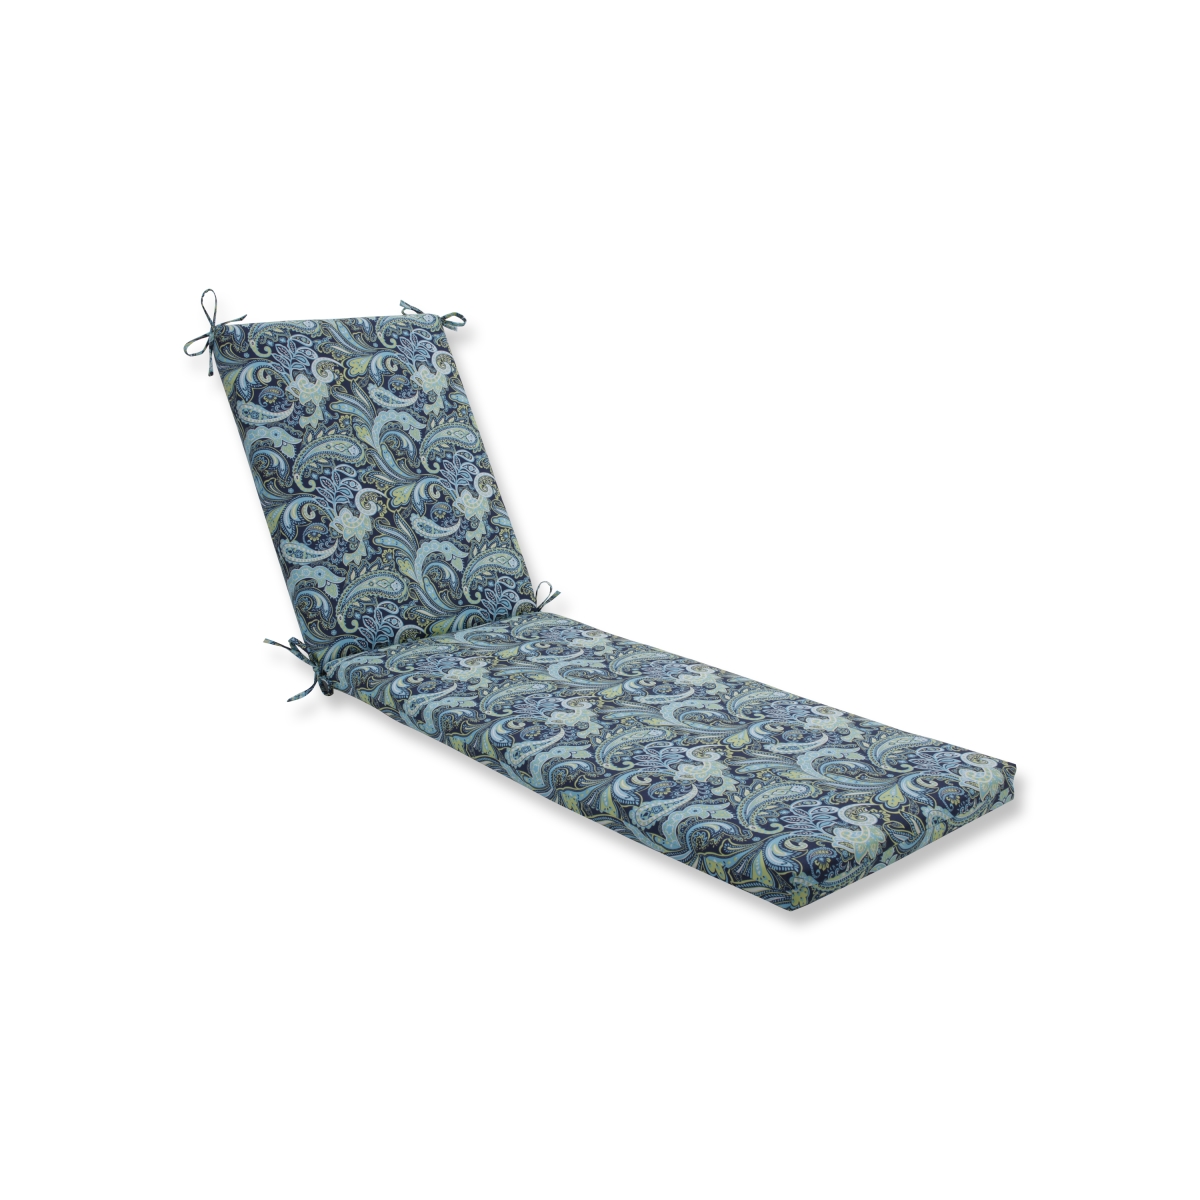 80 X 23 X 3 In. Outdoor & Indoor Pretty Paisley Navy Chaise Lounge Cushion, Blue